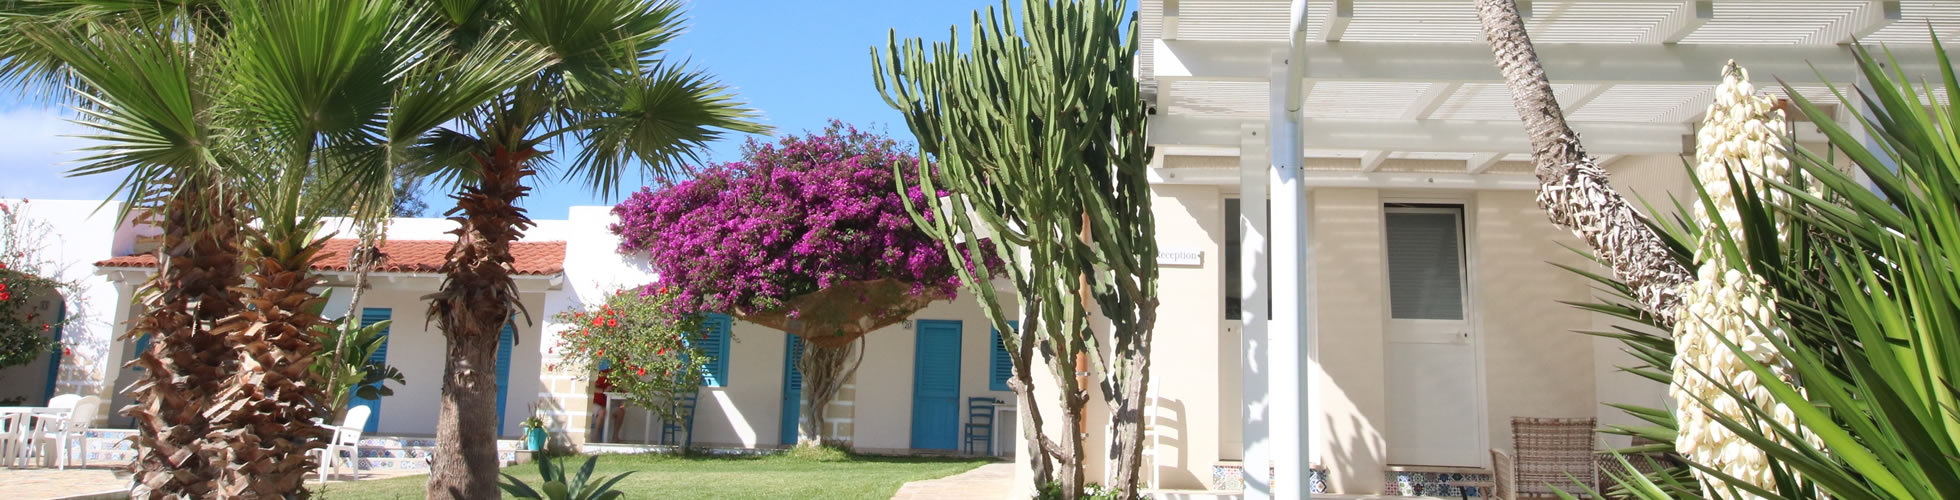 Services of the Antichi Mulini guest house in Favignana